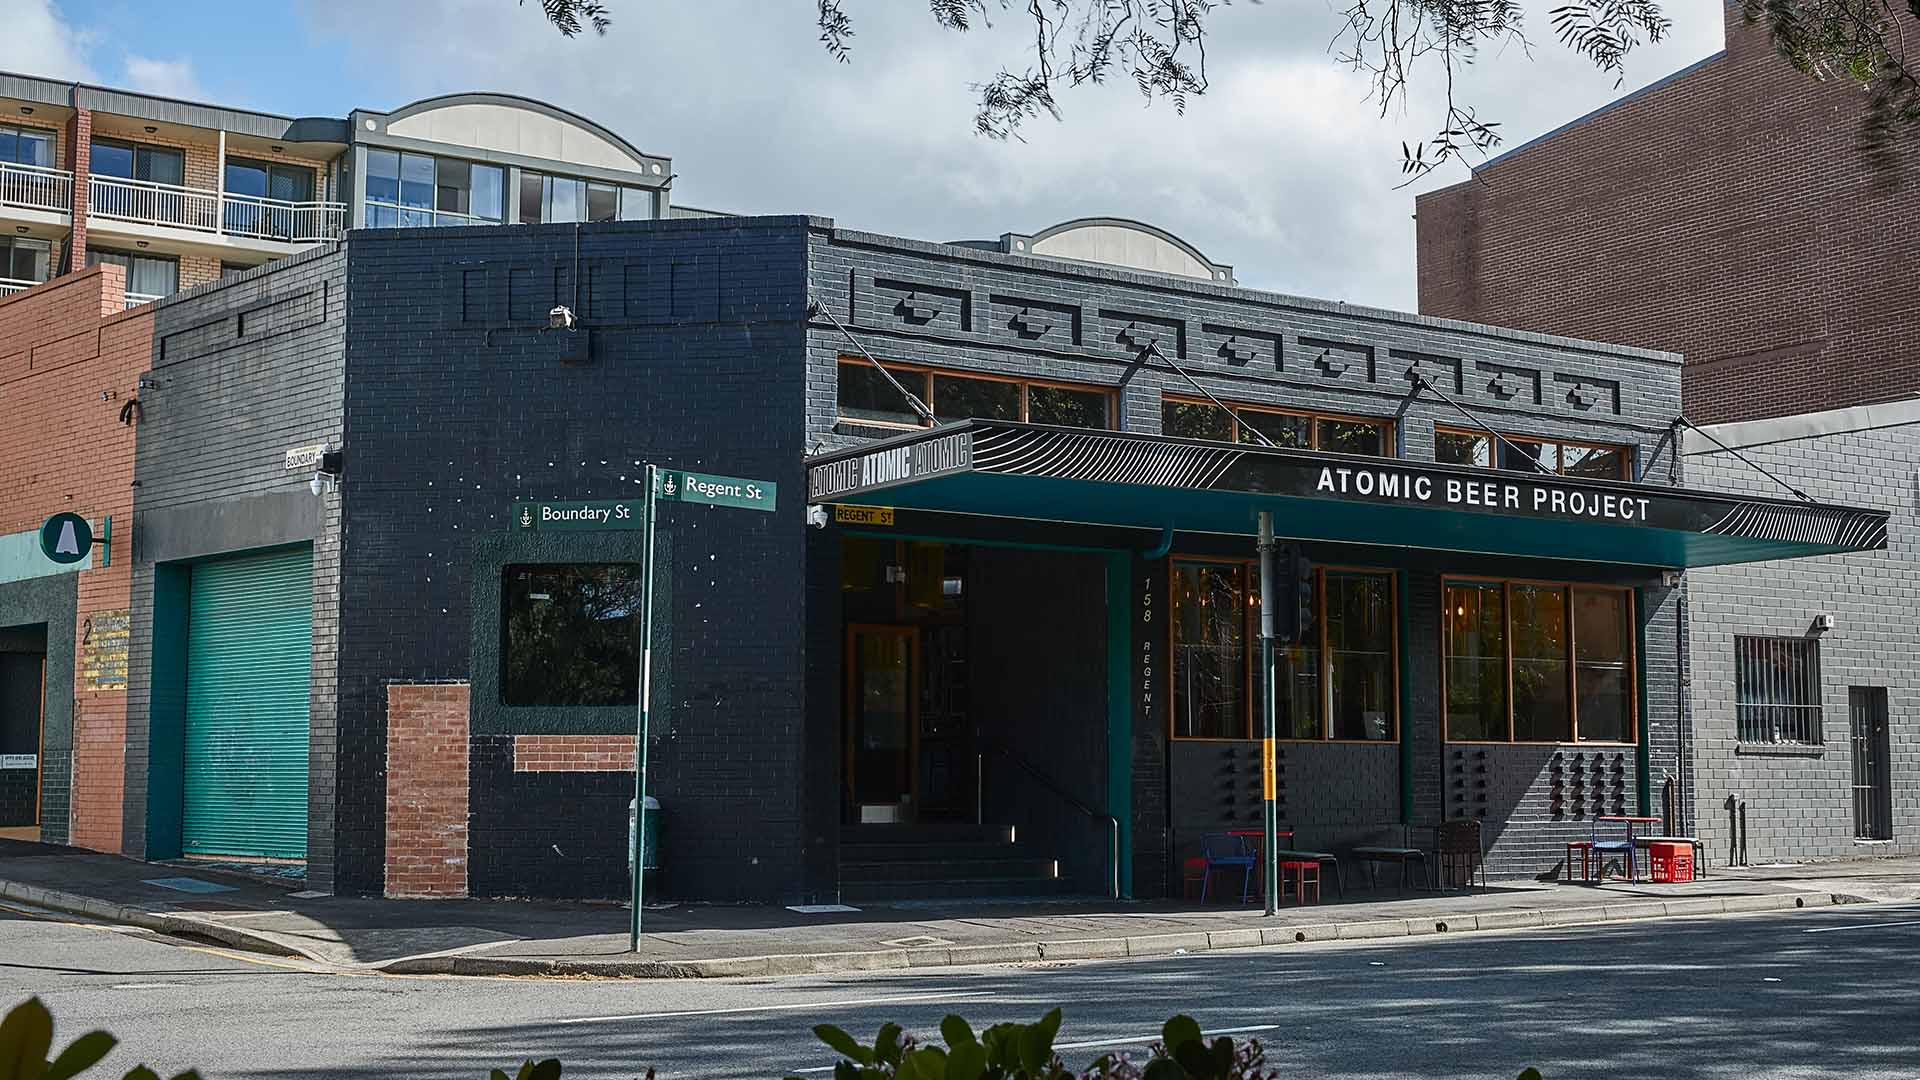 The exterior of Atomic Beer Project - one of the best breweries in Sydney.